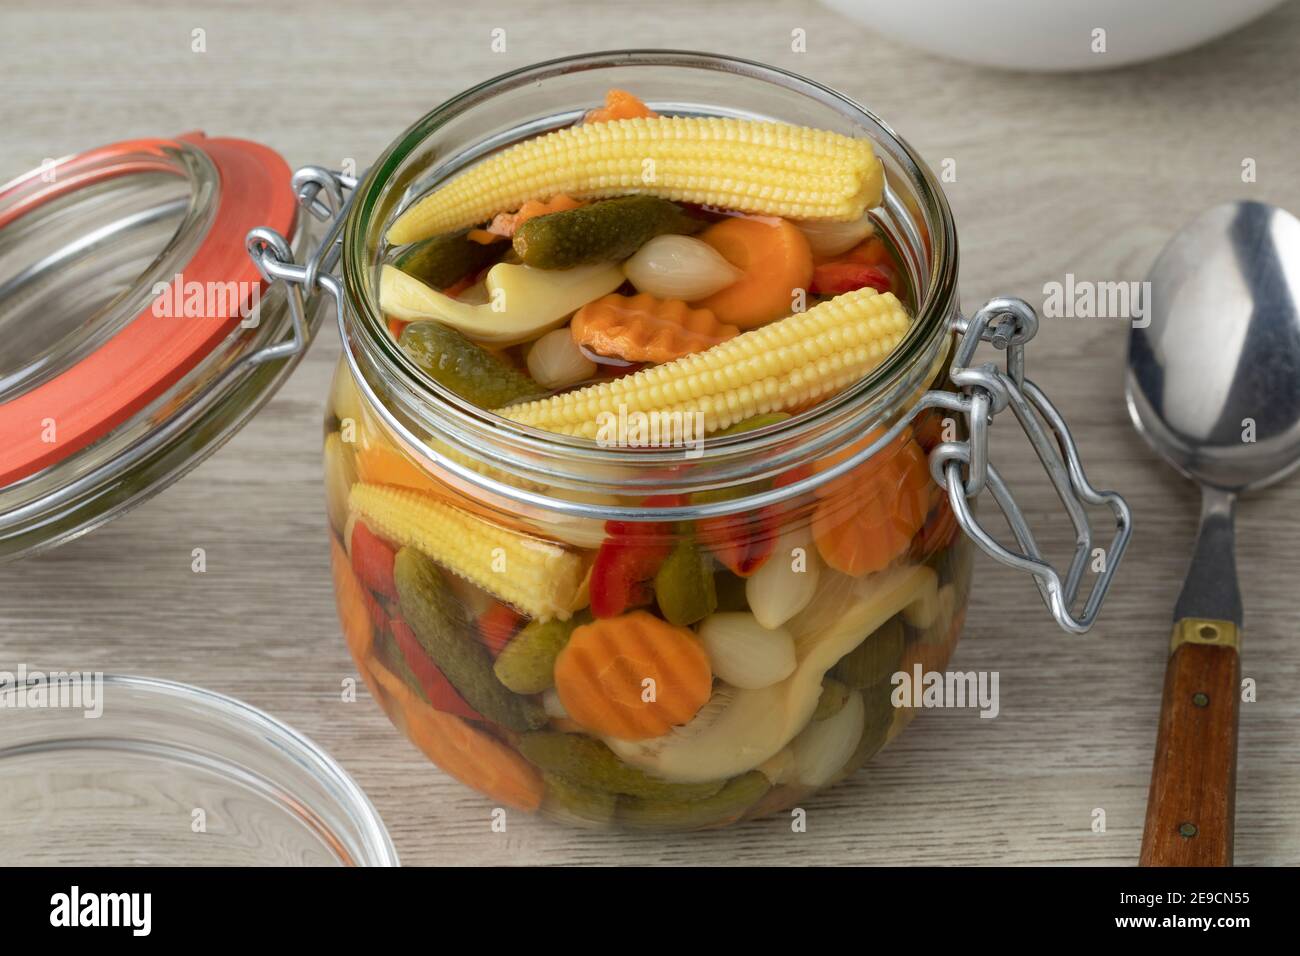 Glass jar with homemade pickled vegetable mix close up as a side dish Stock Photo